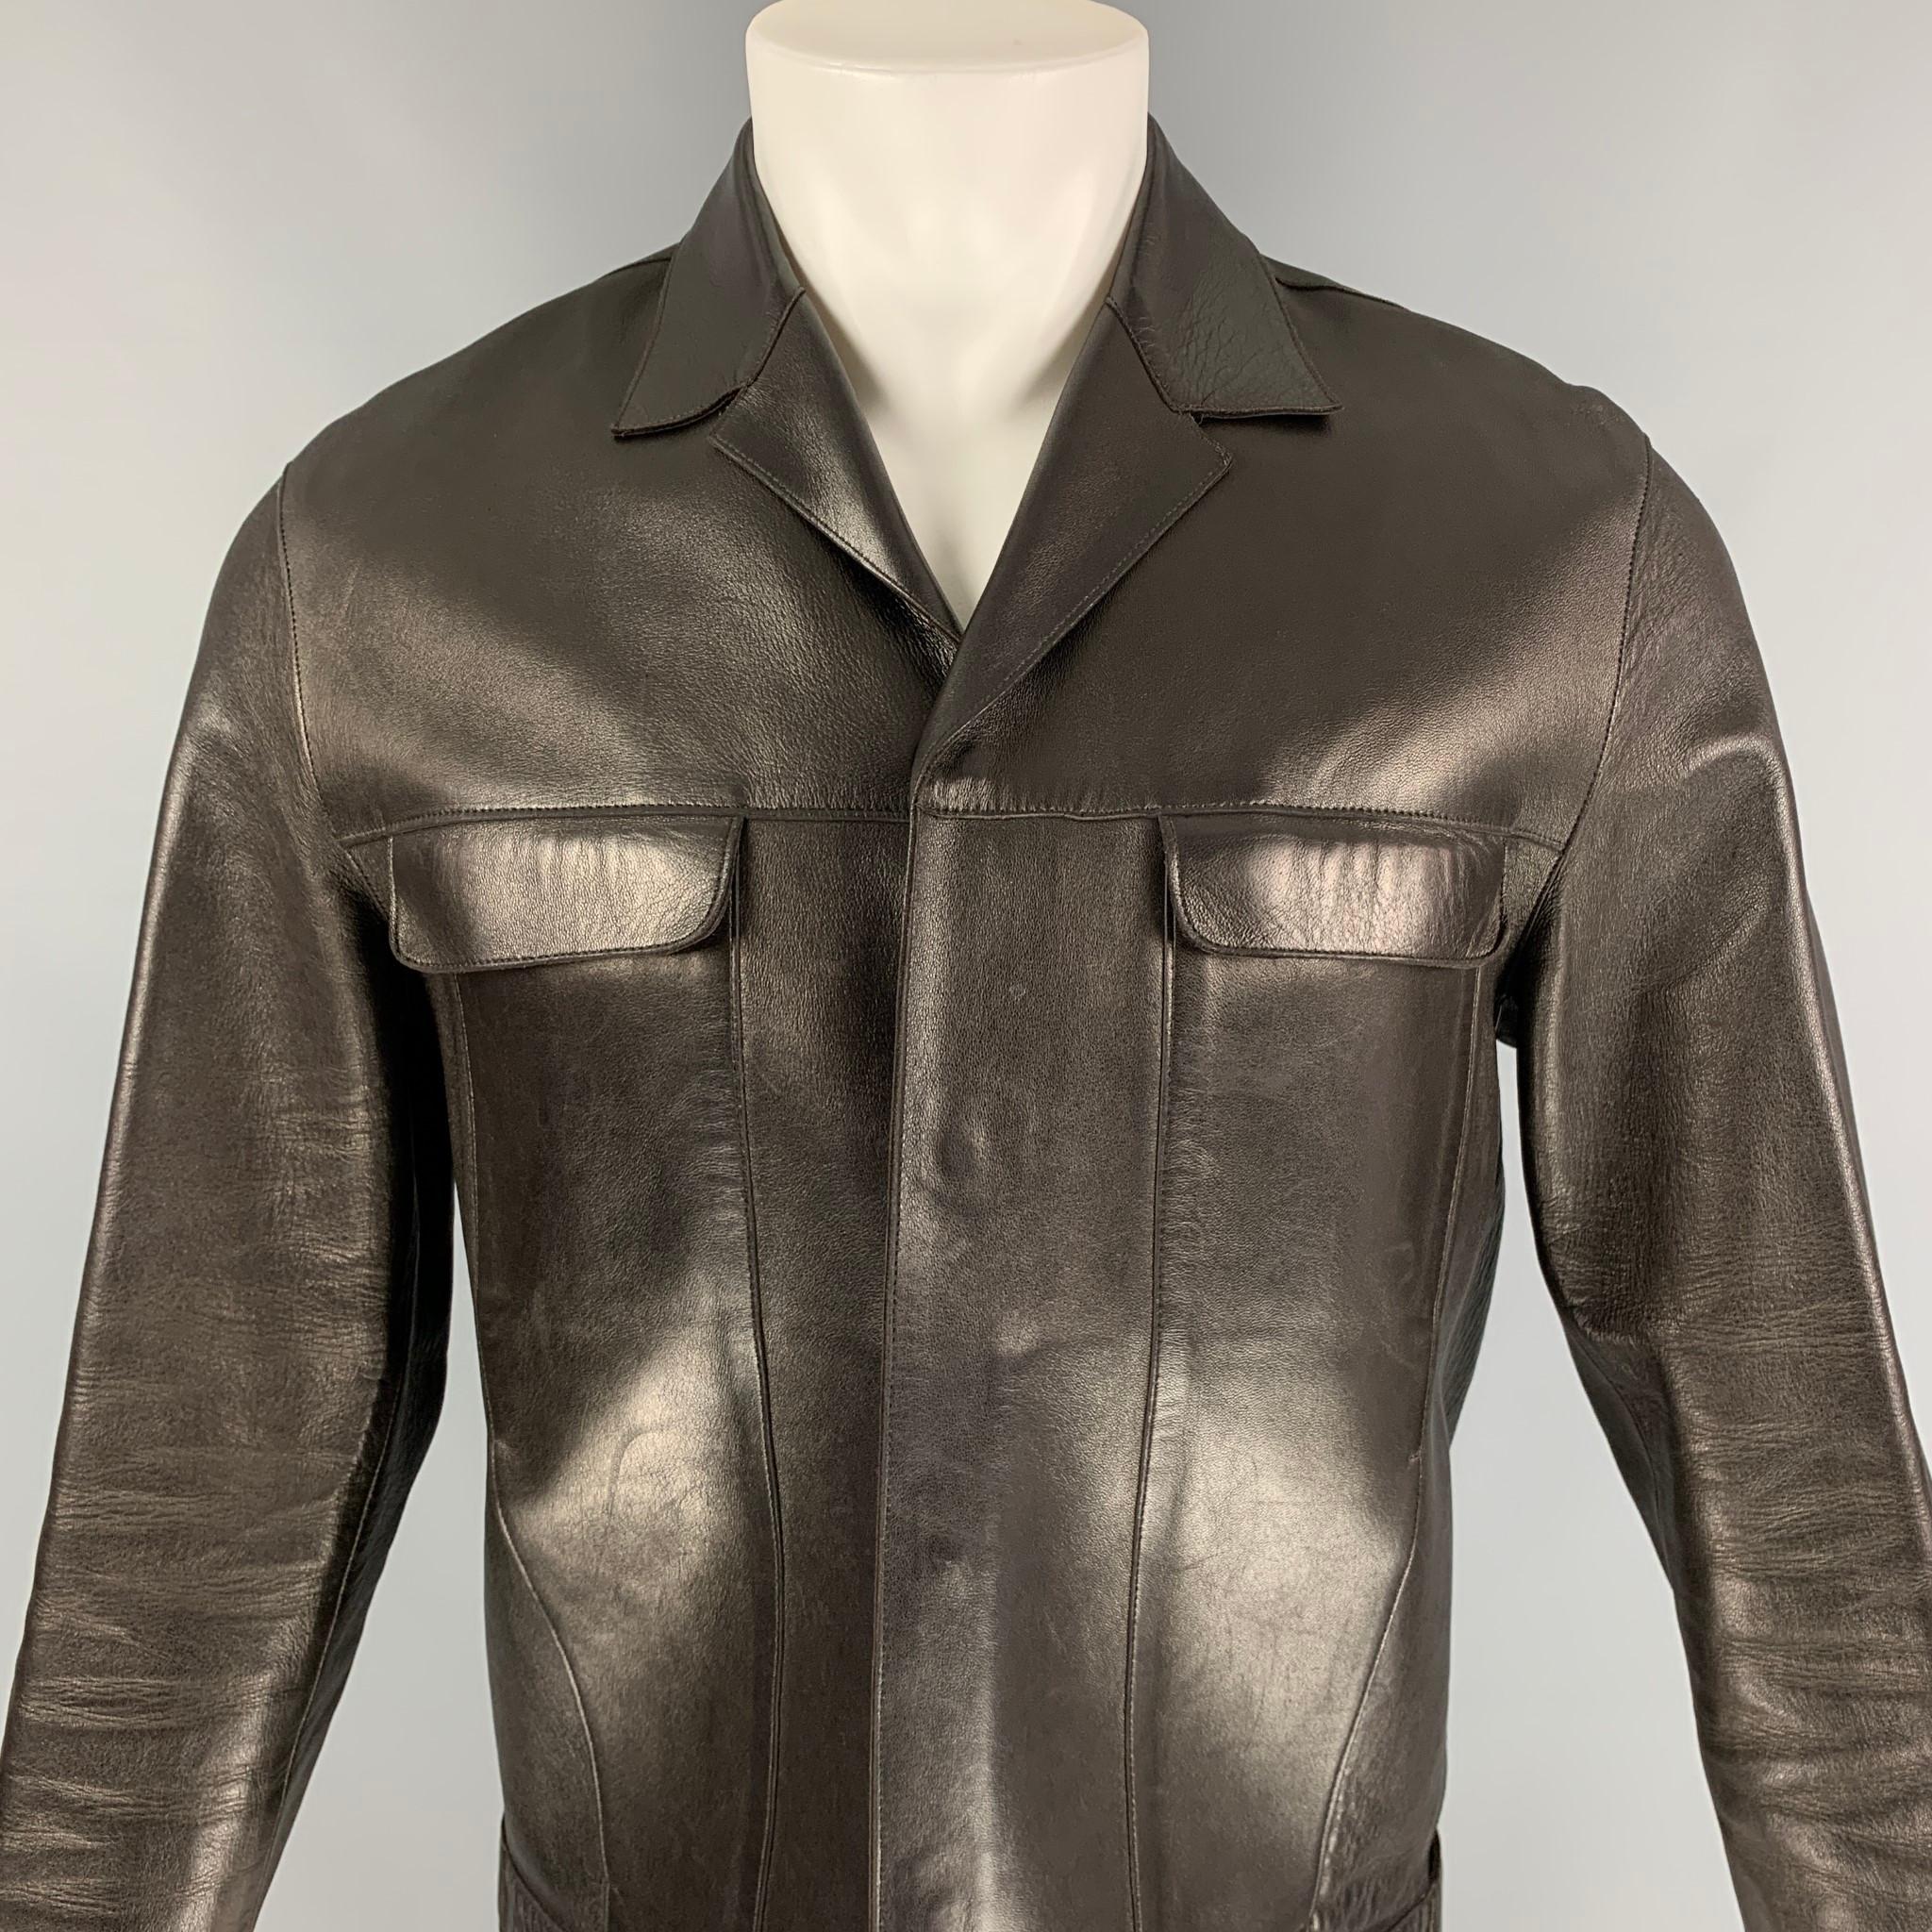 PRADA jacket comes in a dark brown leather featuring a notch lapel, front pockets, and a hidden snap button closure. Made in Italy. 

Excellent Pre-Owned Condition.
Marked: 38

Measurements:

Shoulder: 18 in.
Chest: 40 in.
Sleeve: 26 in.
Length: